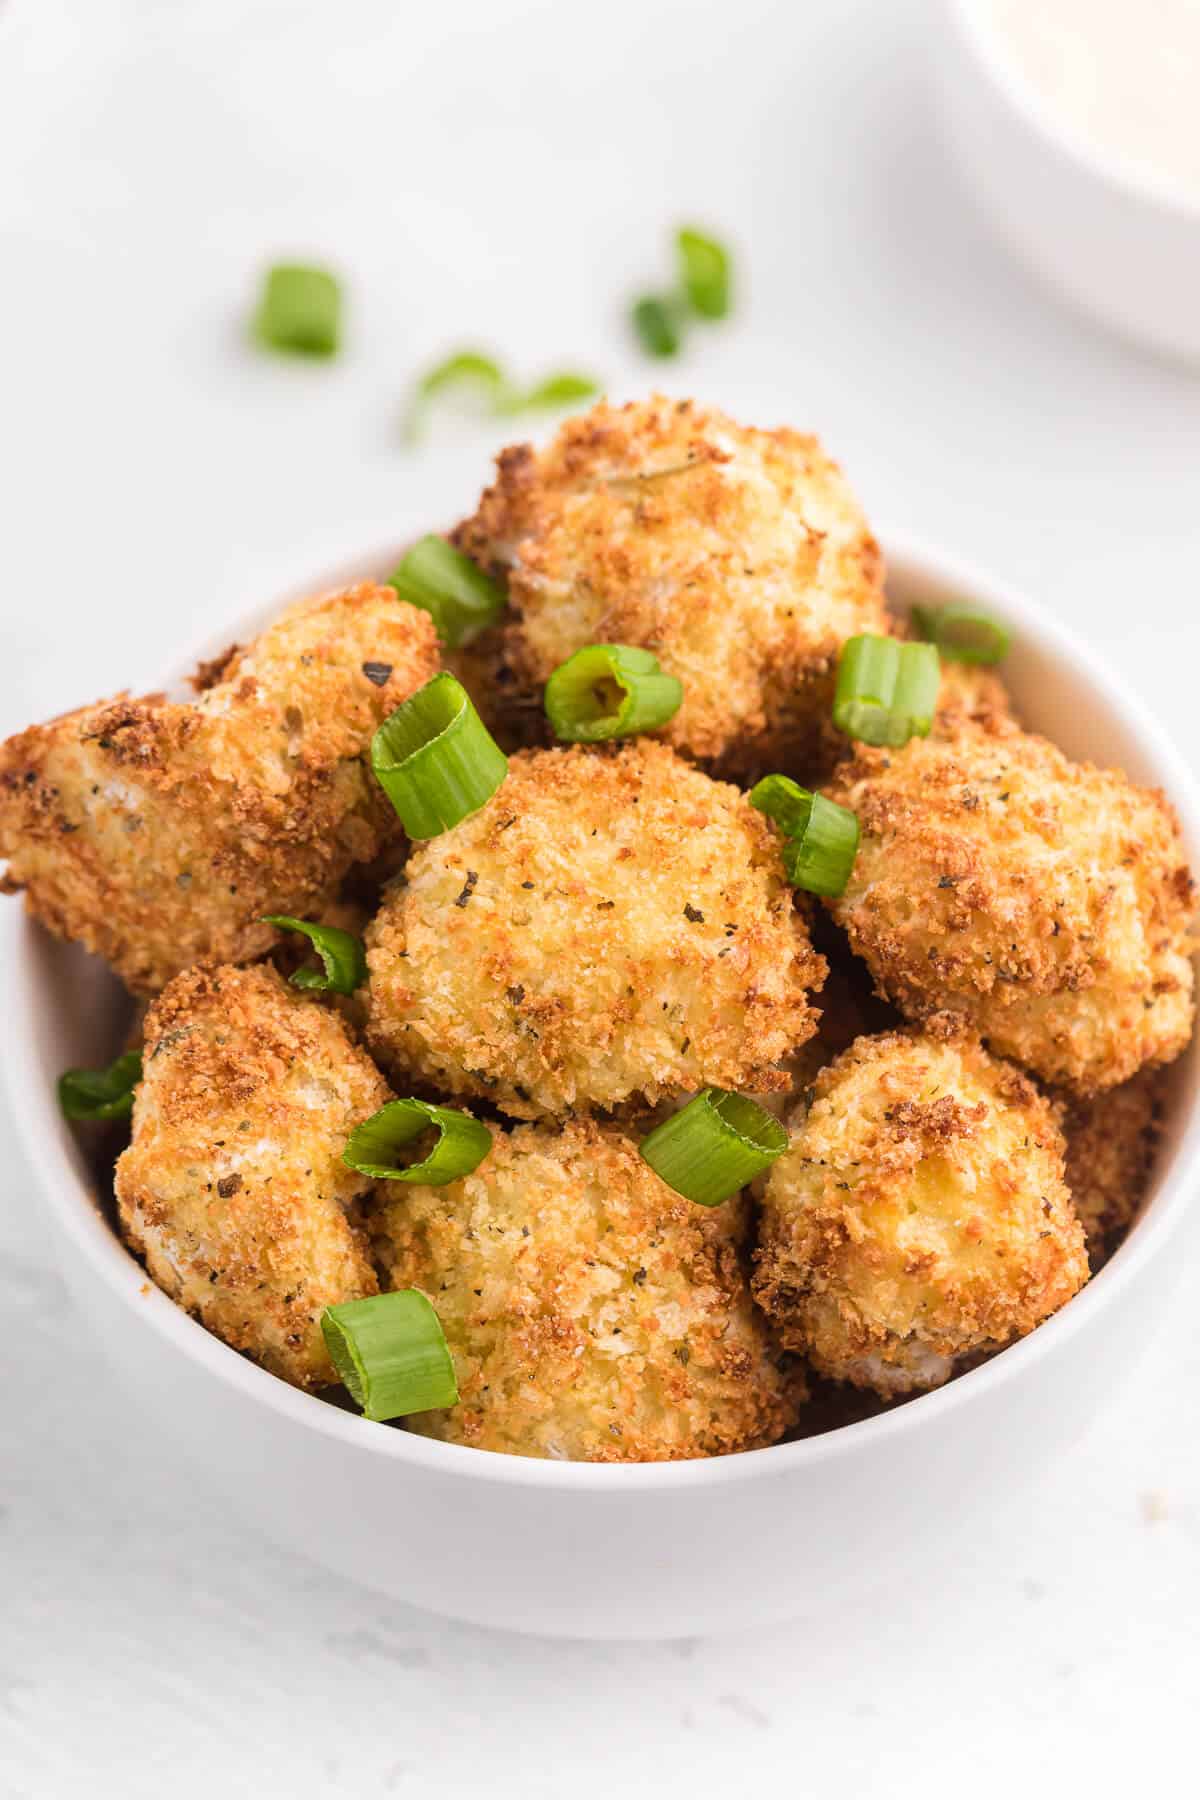 Air Fryer Cauliflower Bites - Get your kids to eat their veggies! Air fried cauliflower that's the perfect side dish or appetizer for dipping.